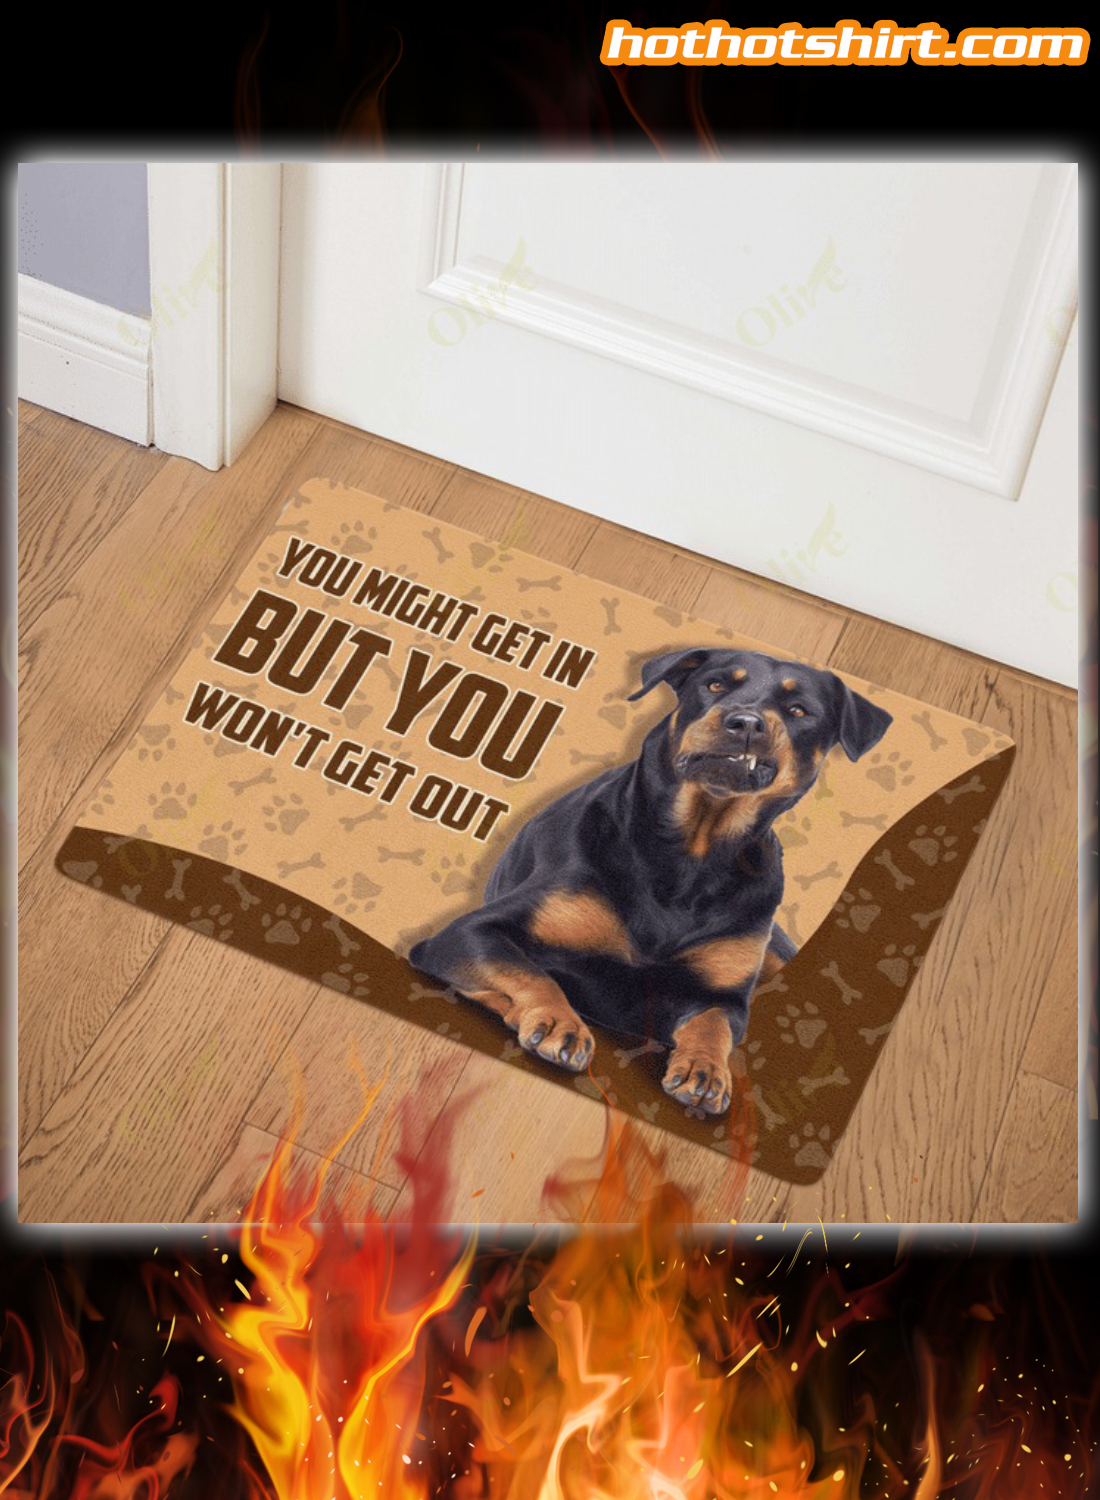 Rottweiler you might get in but you won't get out doormat